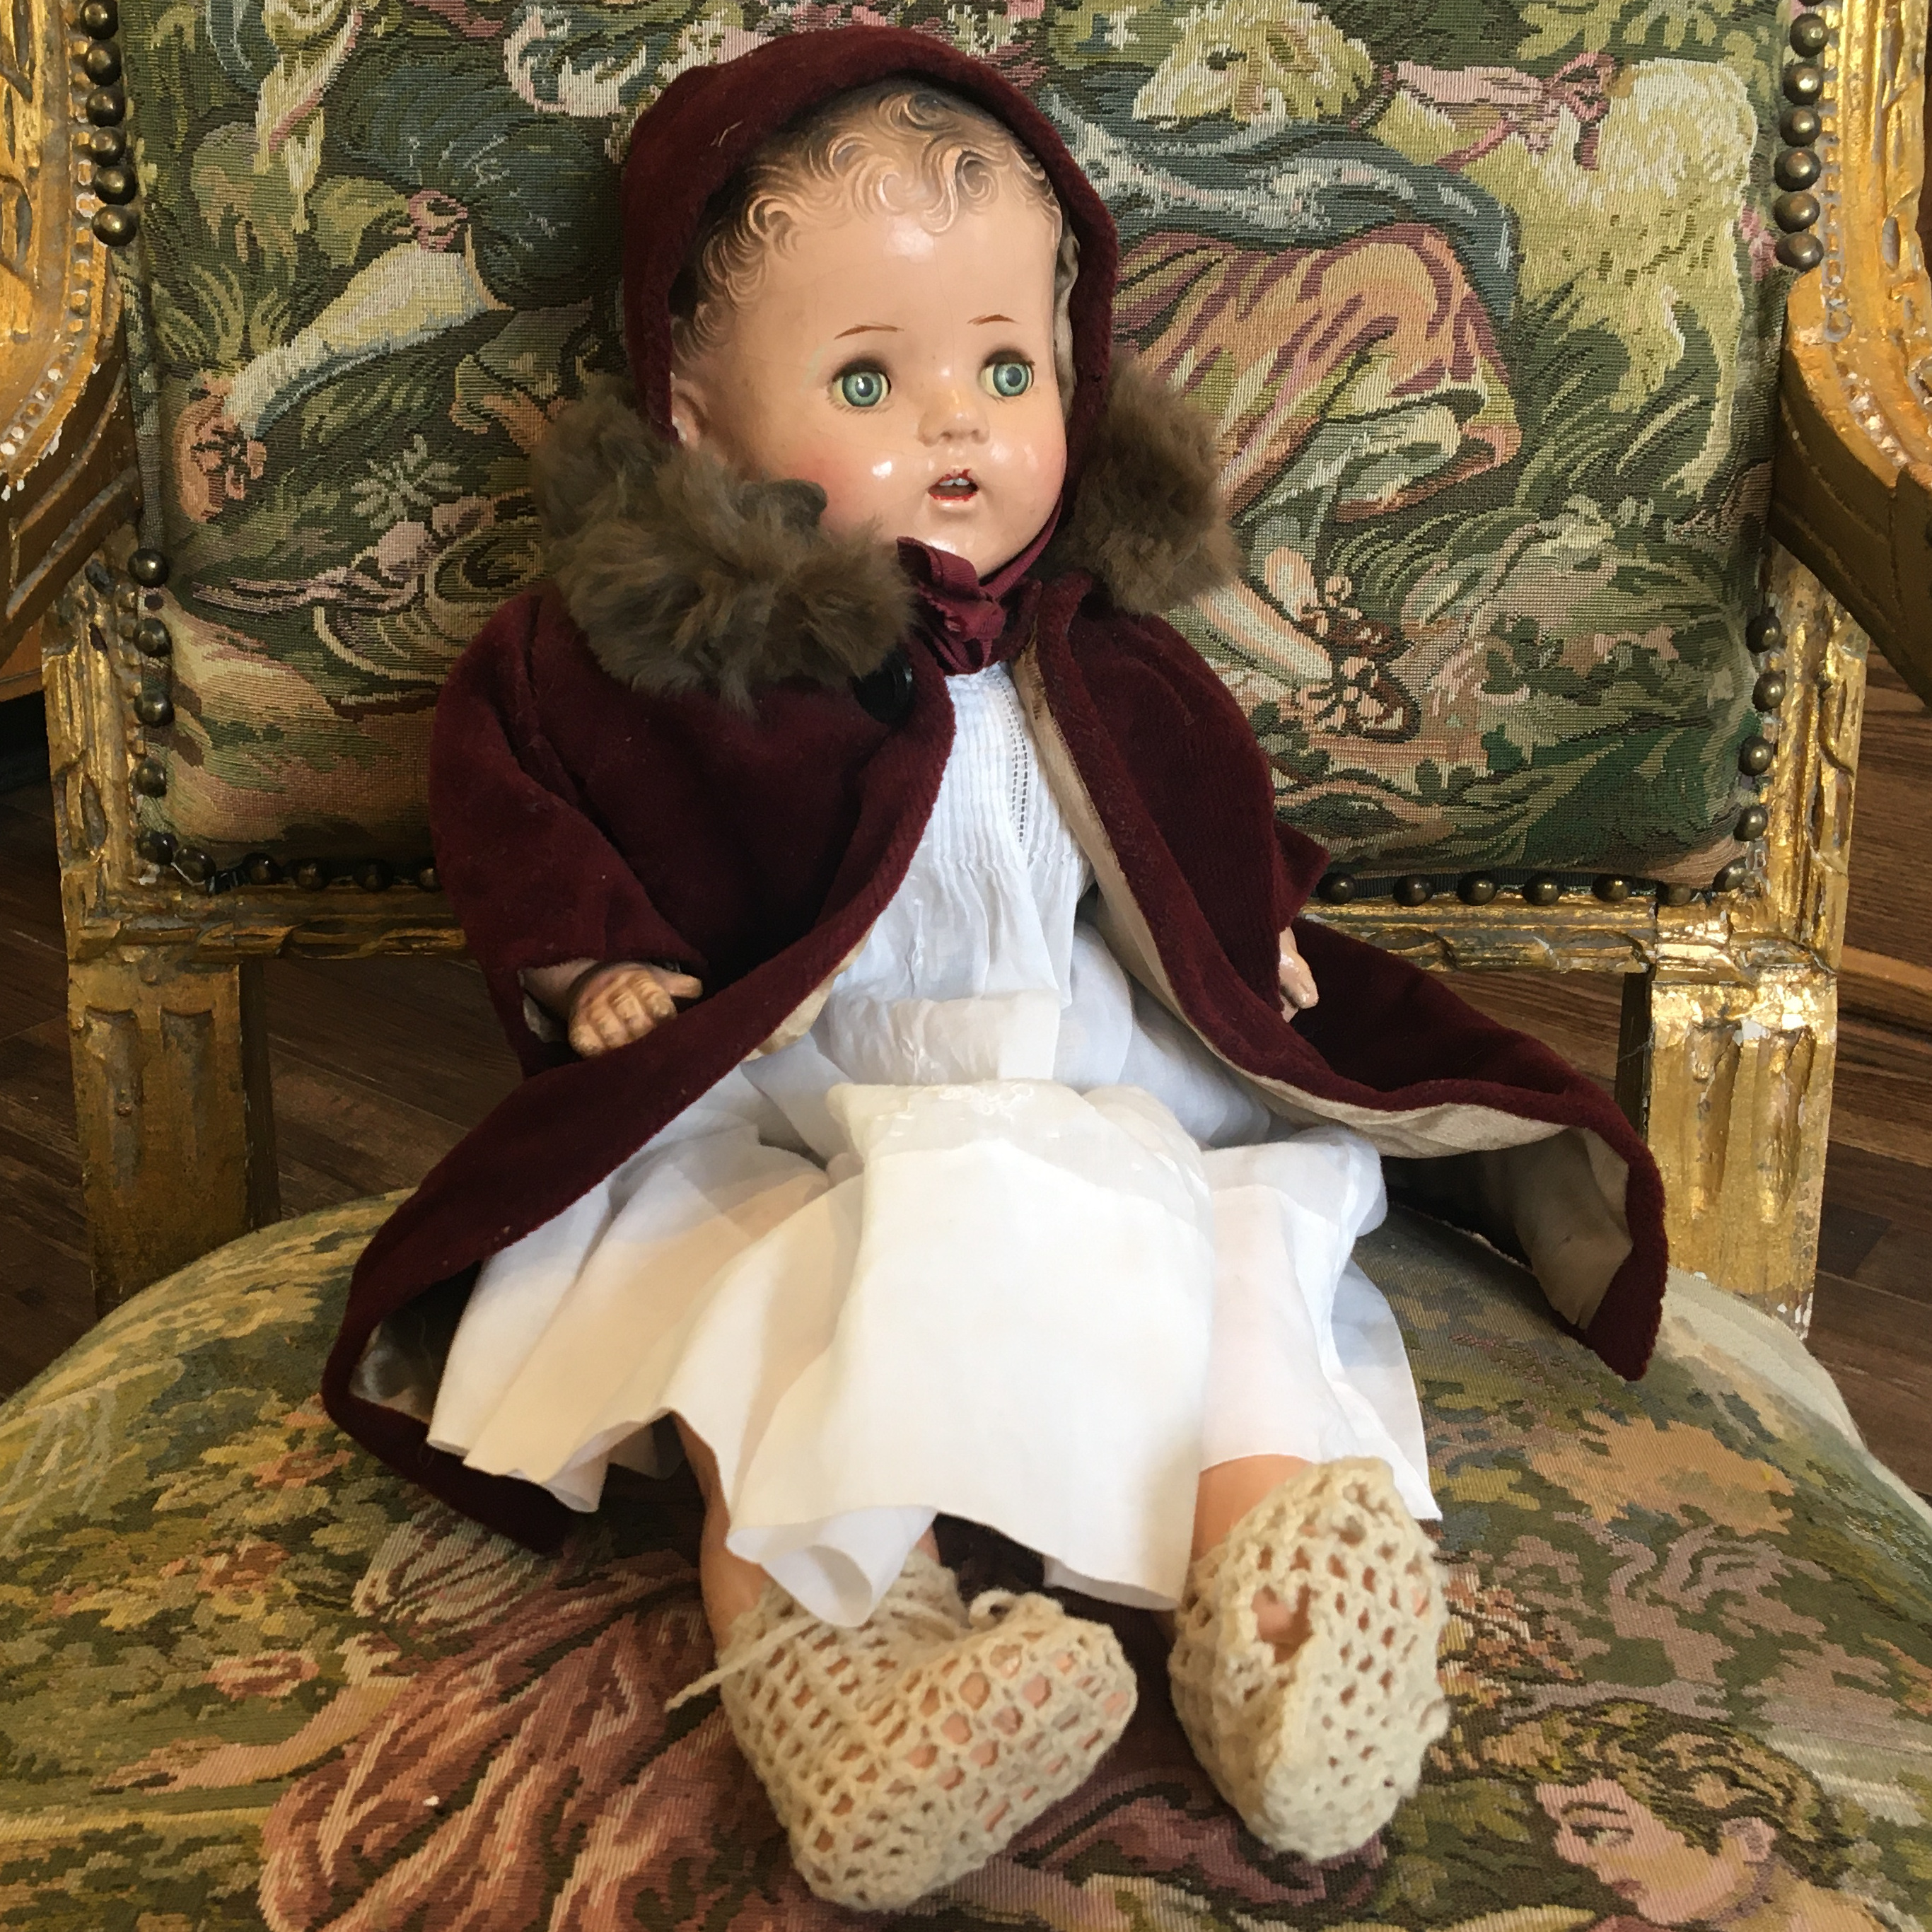 Light-skinned vintage baby doll in white cotton dress and burgundy corduroy coat and bonnet, with sleep eyes and dark molded hair